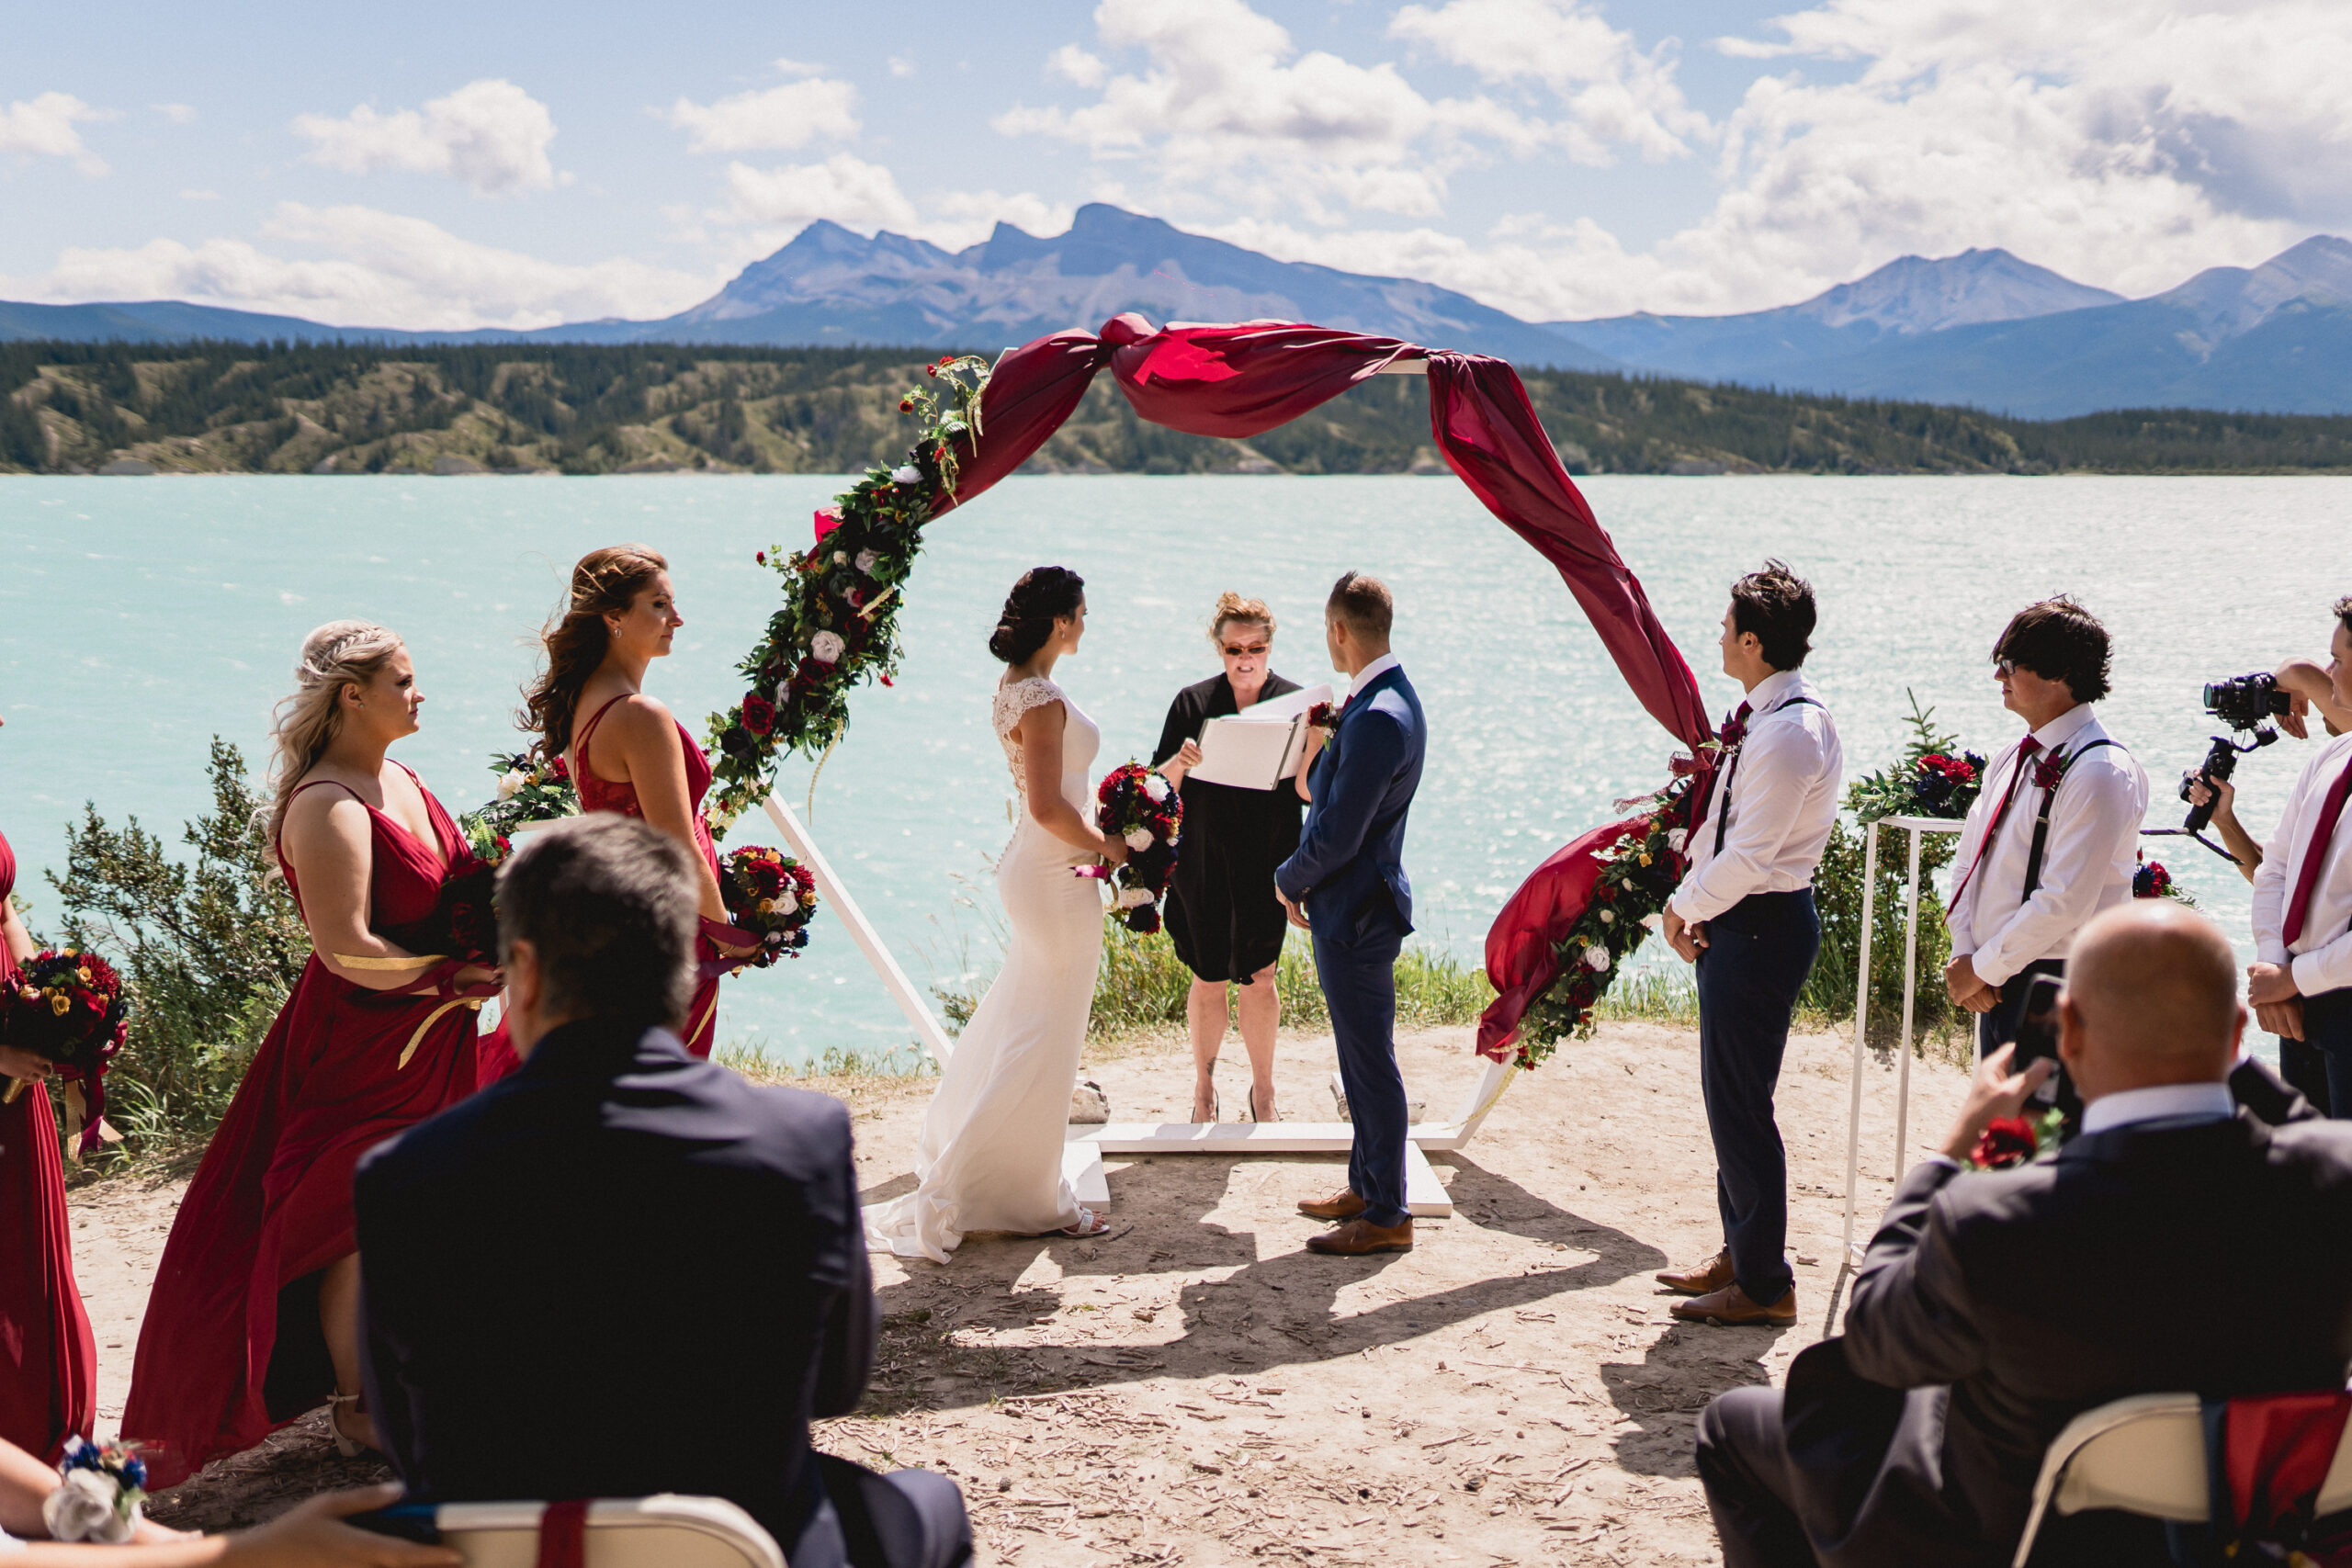 Lakefront wedding ceremony with red wedding ceremony arch and bridesmaids in red gowns